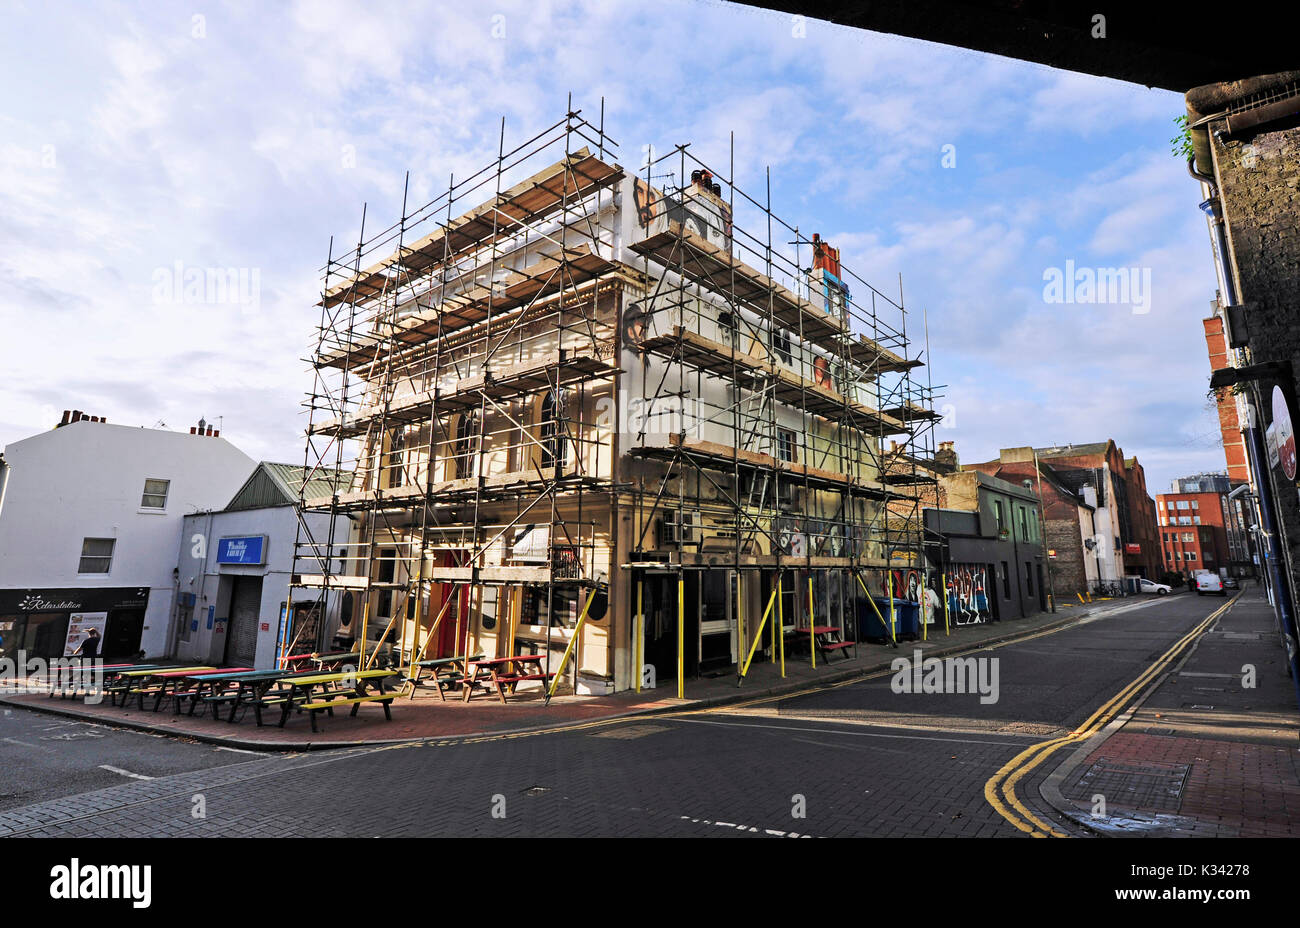 Brighton UK 31 August 2017 - The famous Prince Albert pub in Trafalgar Street Brighton near the station is being renovated which is well known for its Music Mural wall and the  Banksy canvas copy of the Kissing Coppers art on the exterior Stock Photo